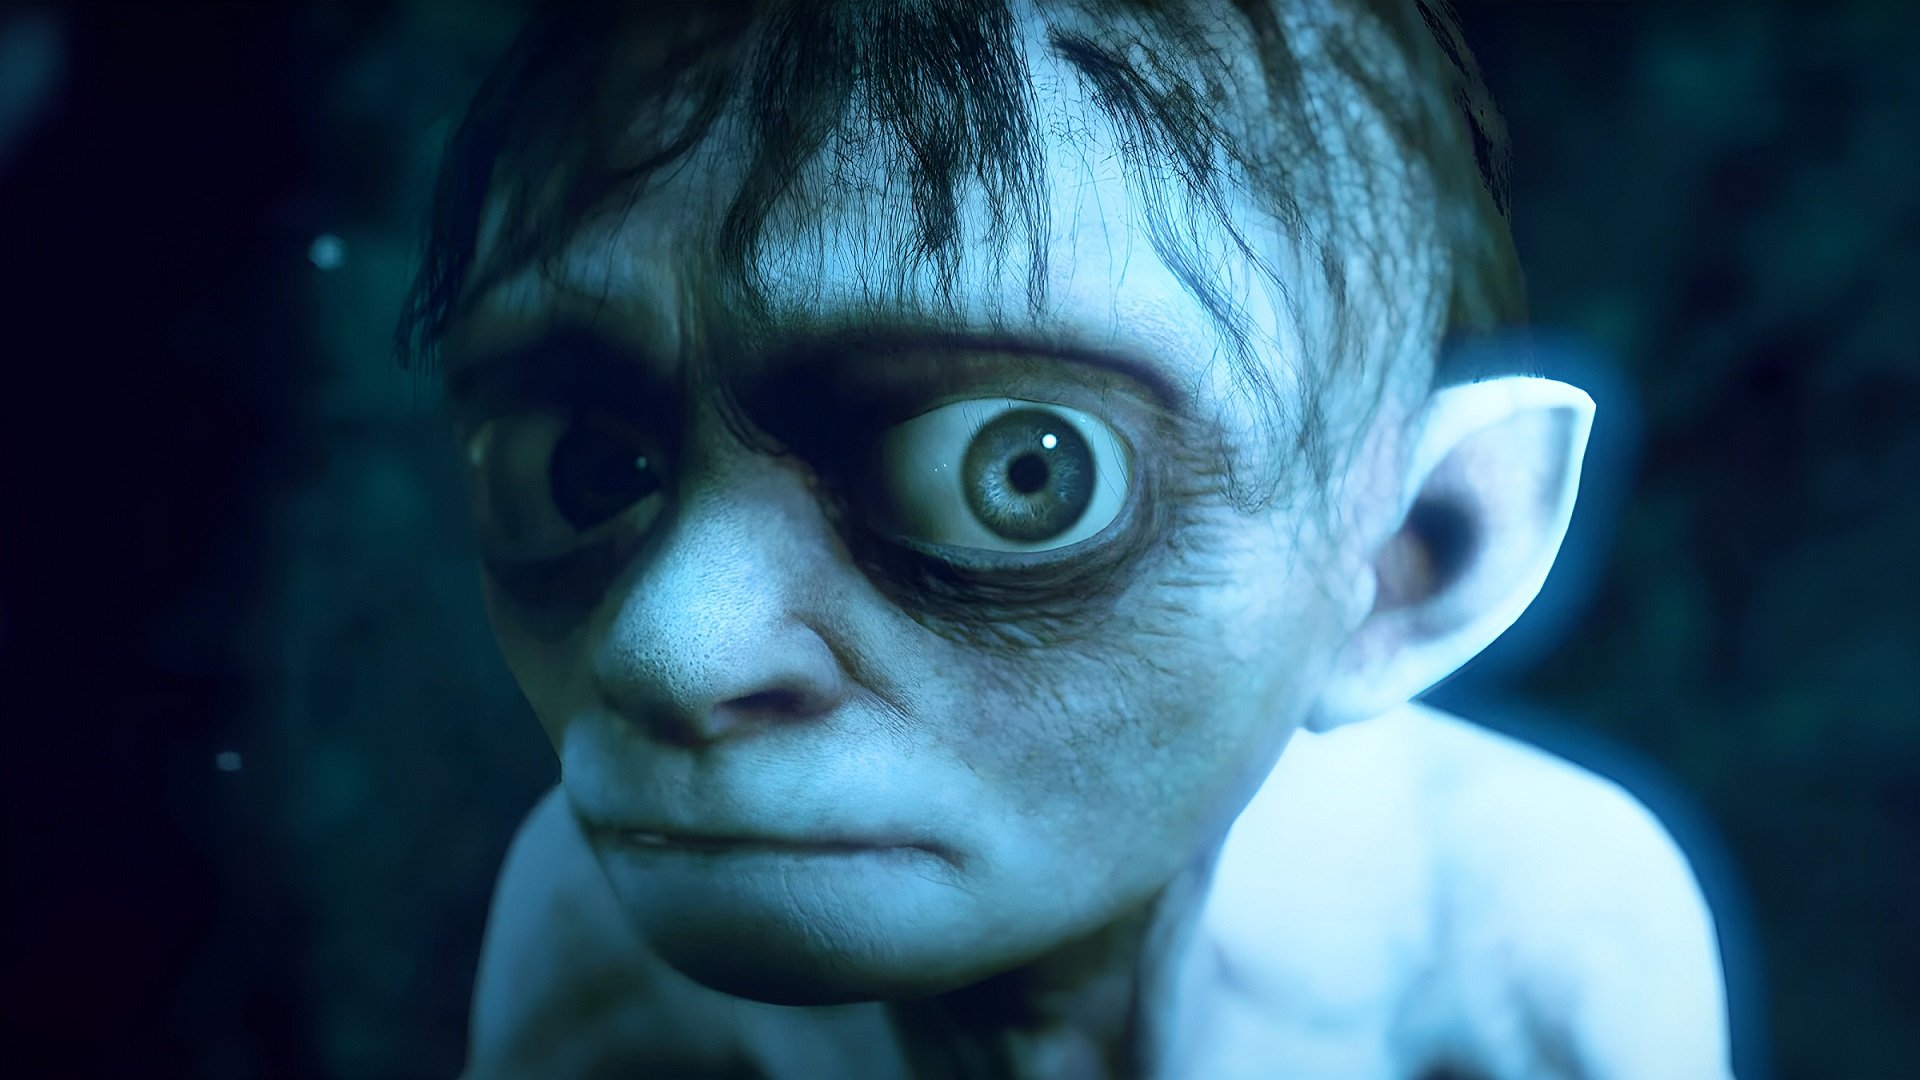 The Lord of the Rings: Gollum - The Making Of Gollum